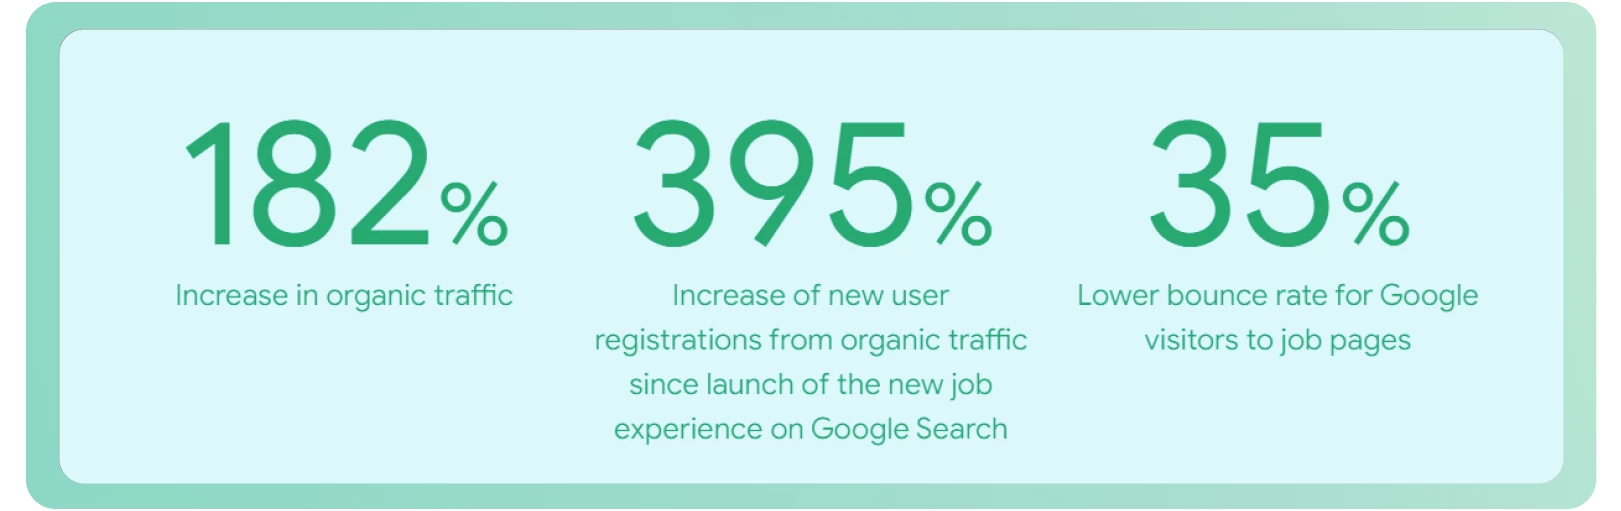 Organic traffic increased by almost 200%.